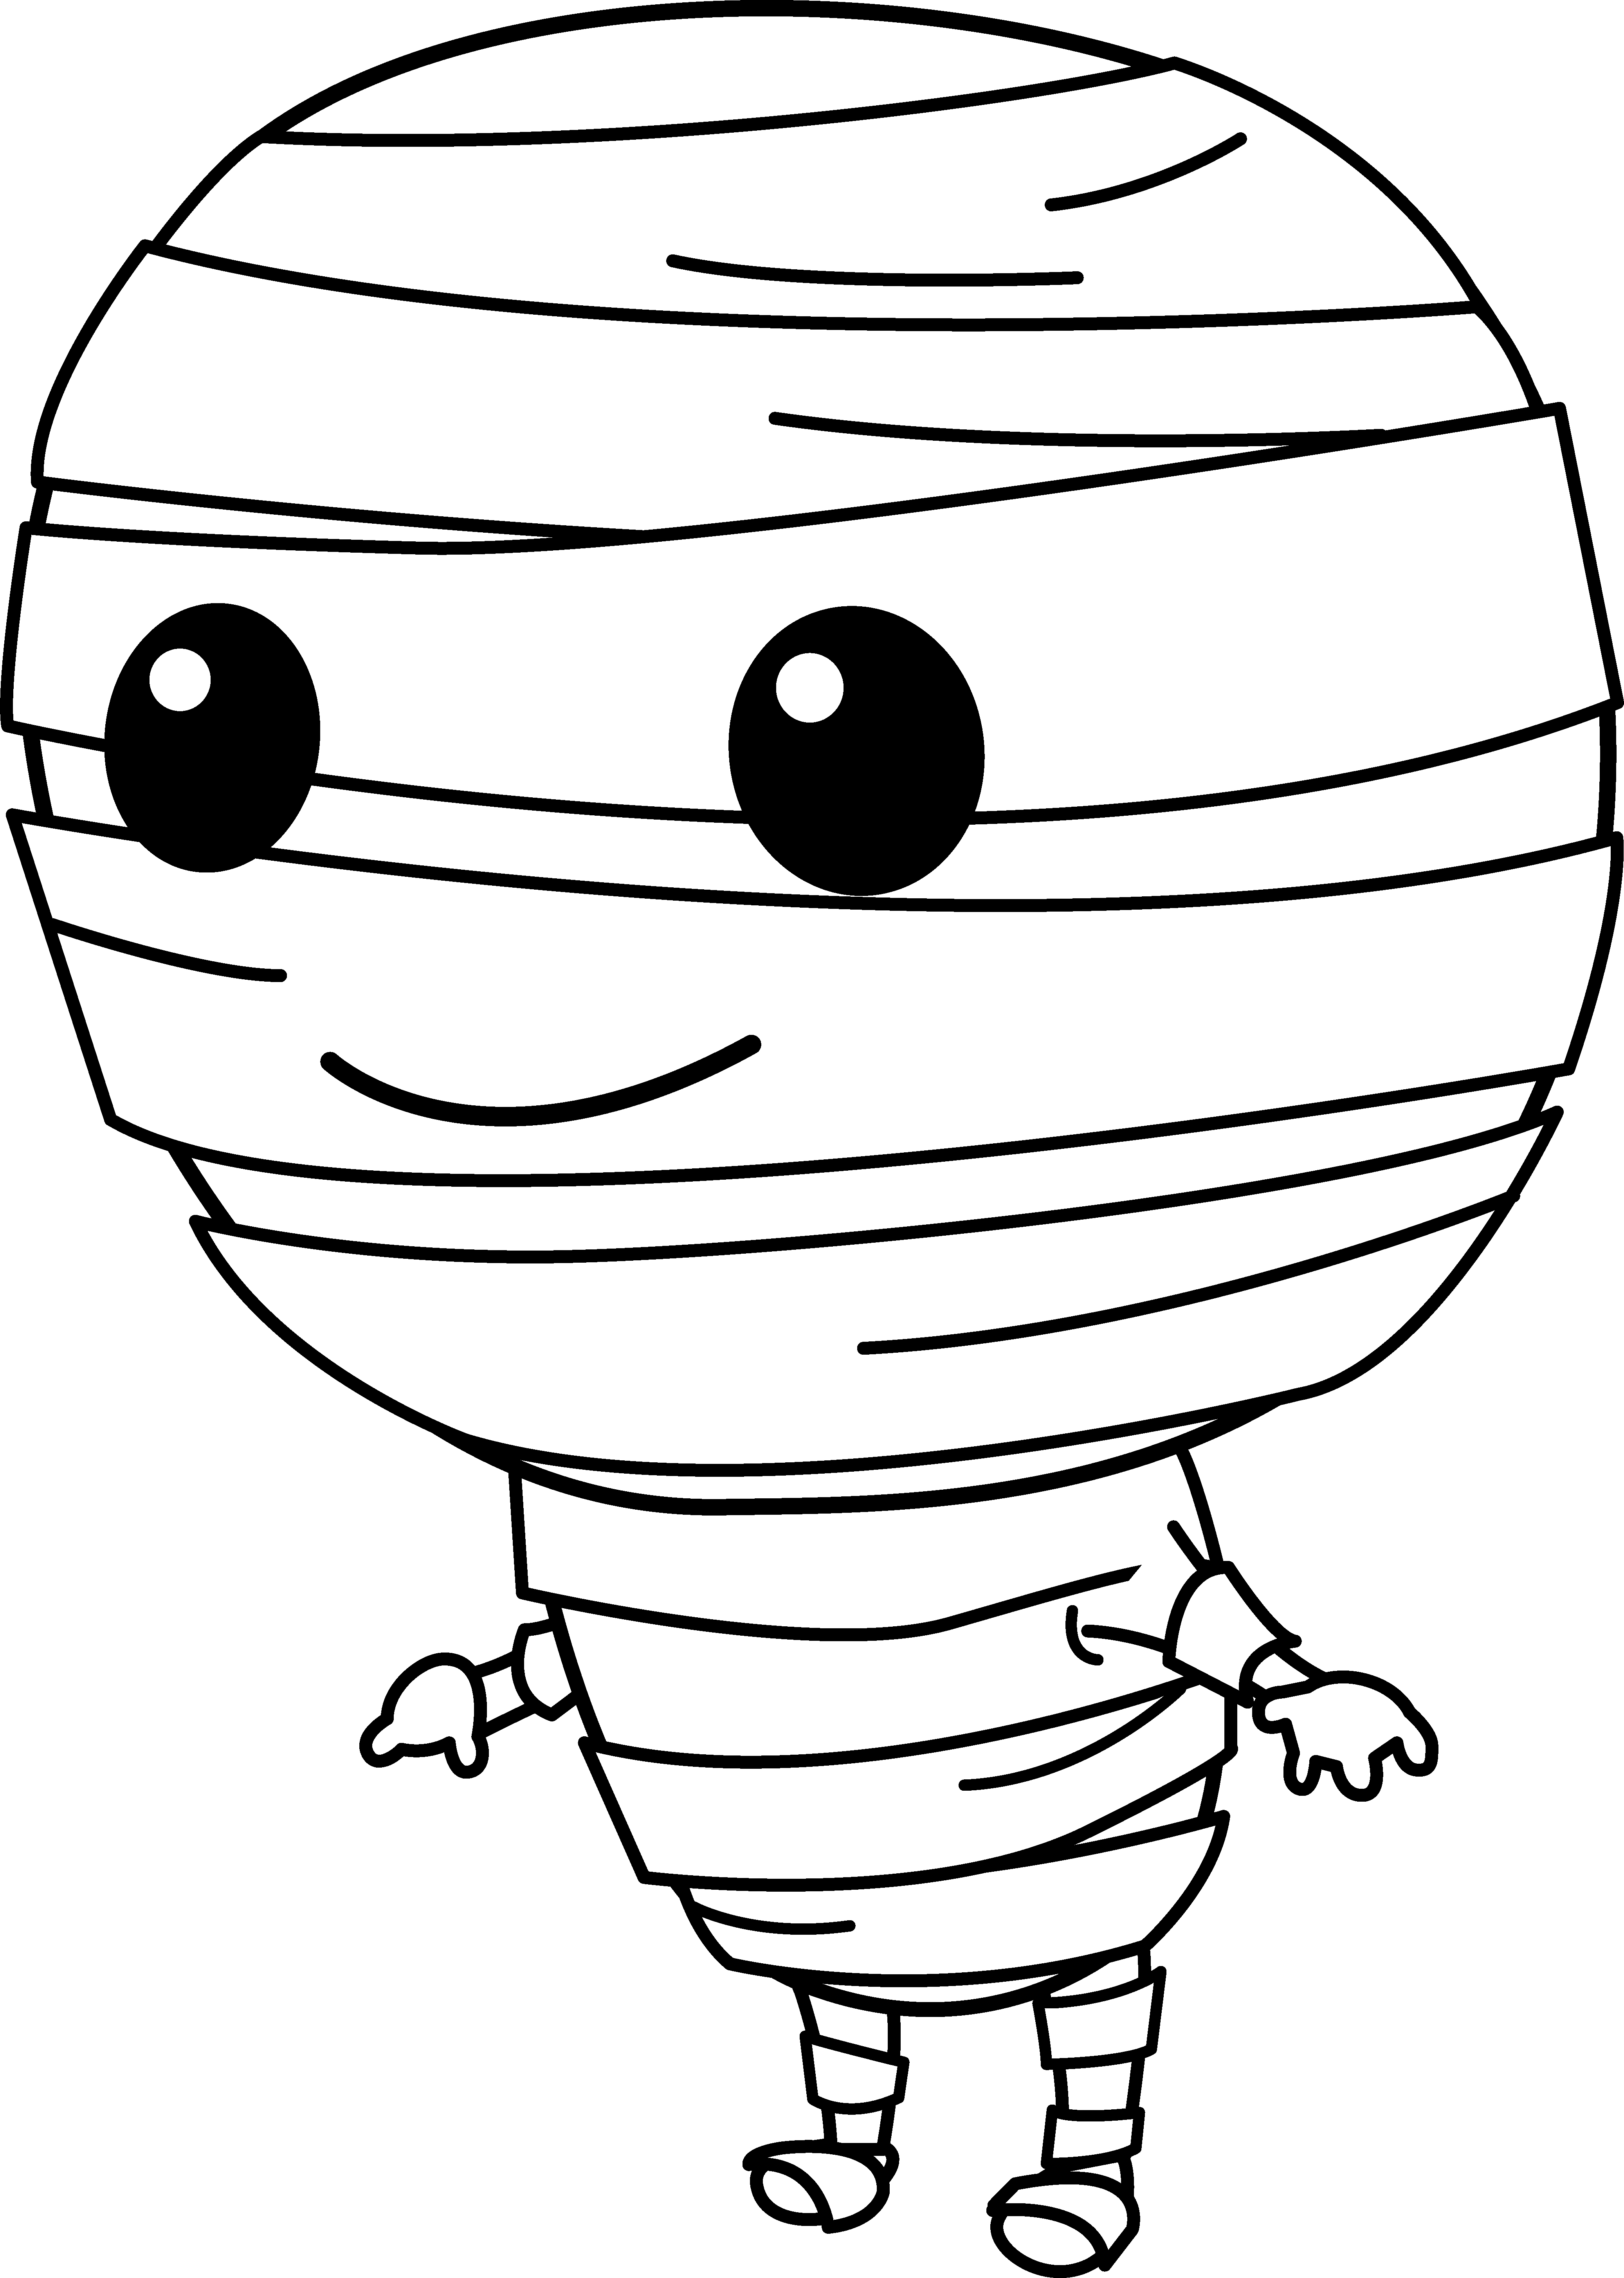 Download PNG image - Scary Mummy PNG File 